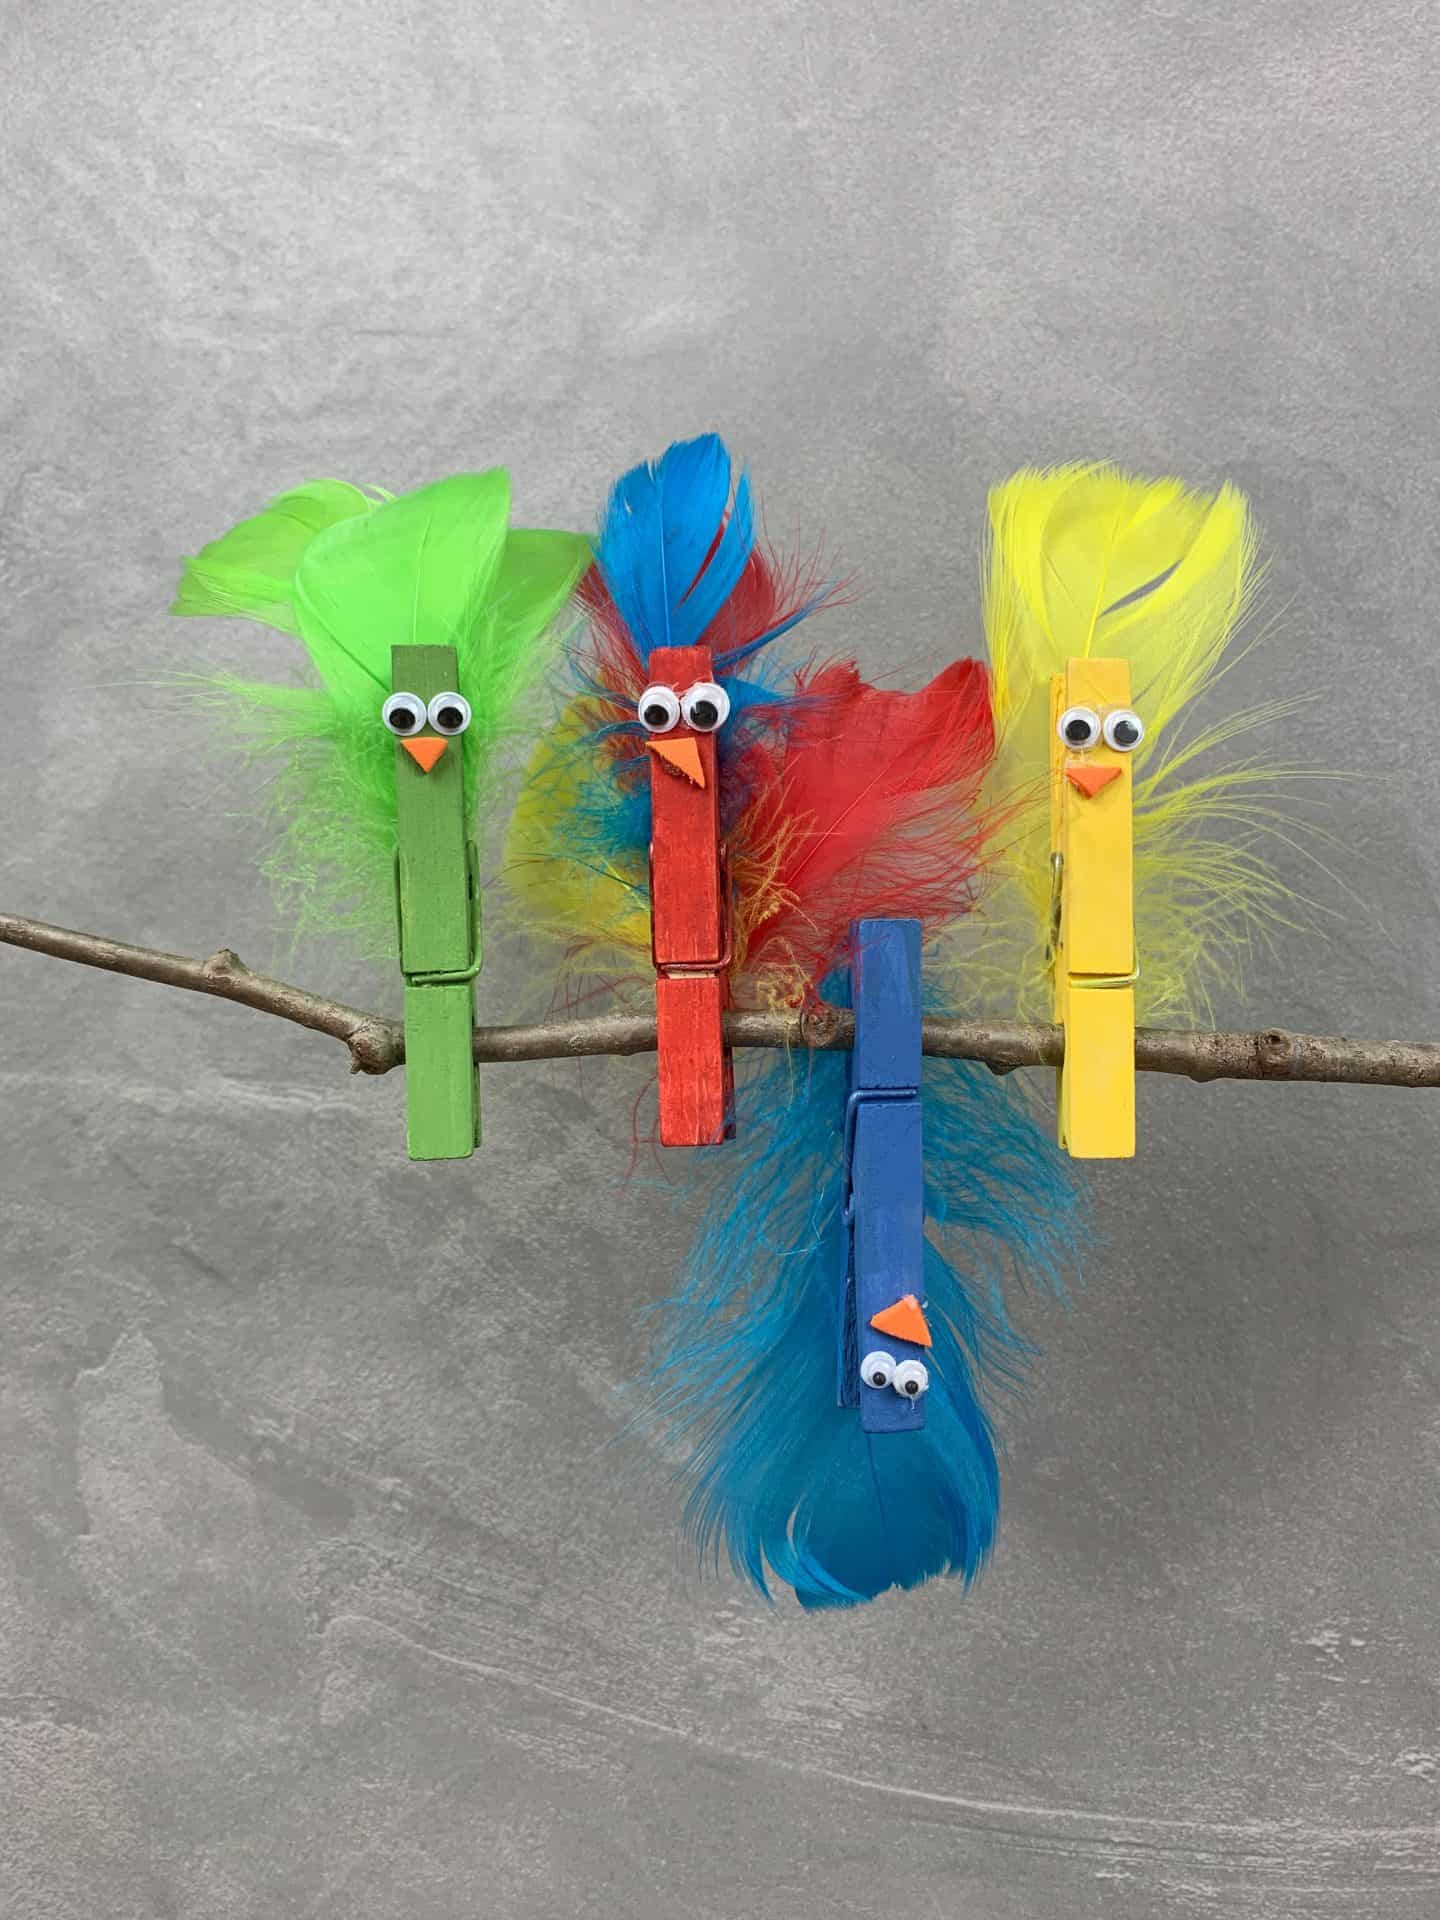 Black Family Travel kids craft kids activities how to make bird buddies with a clothespin homeschooling kids art 2